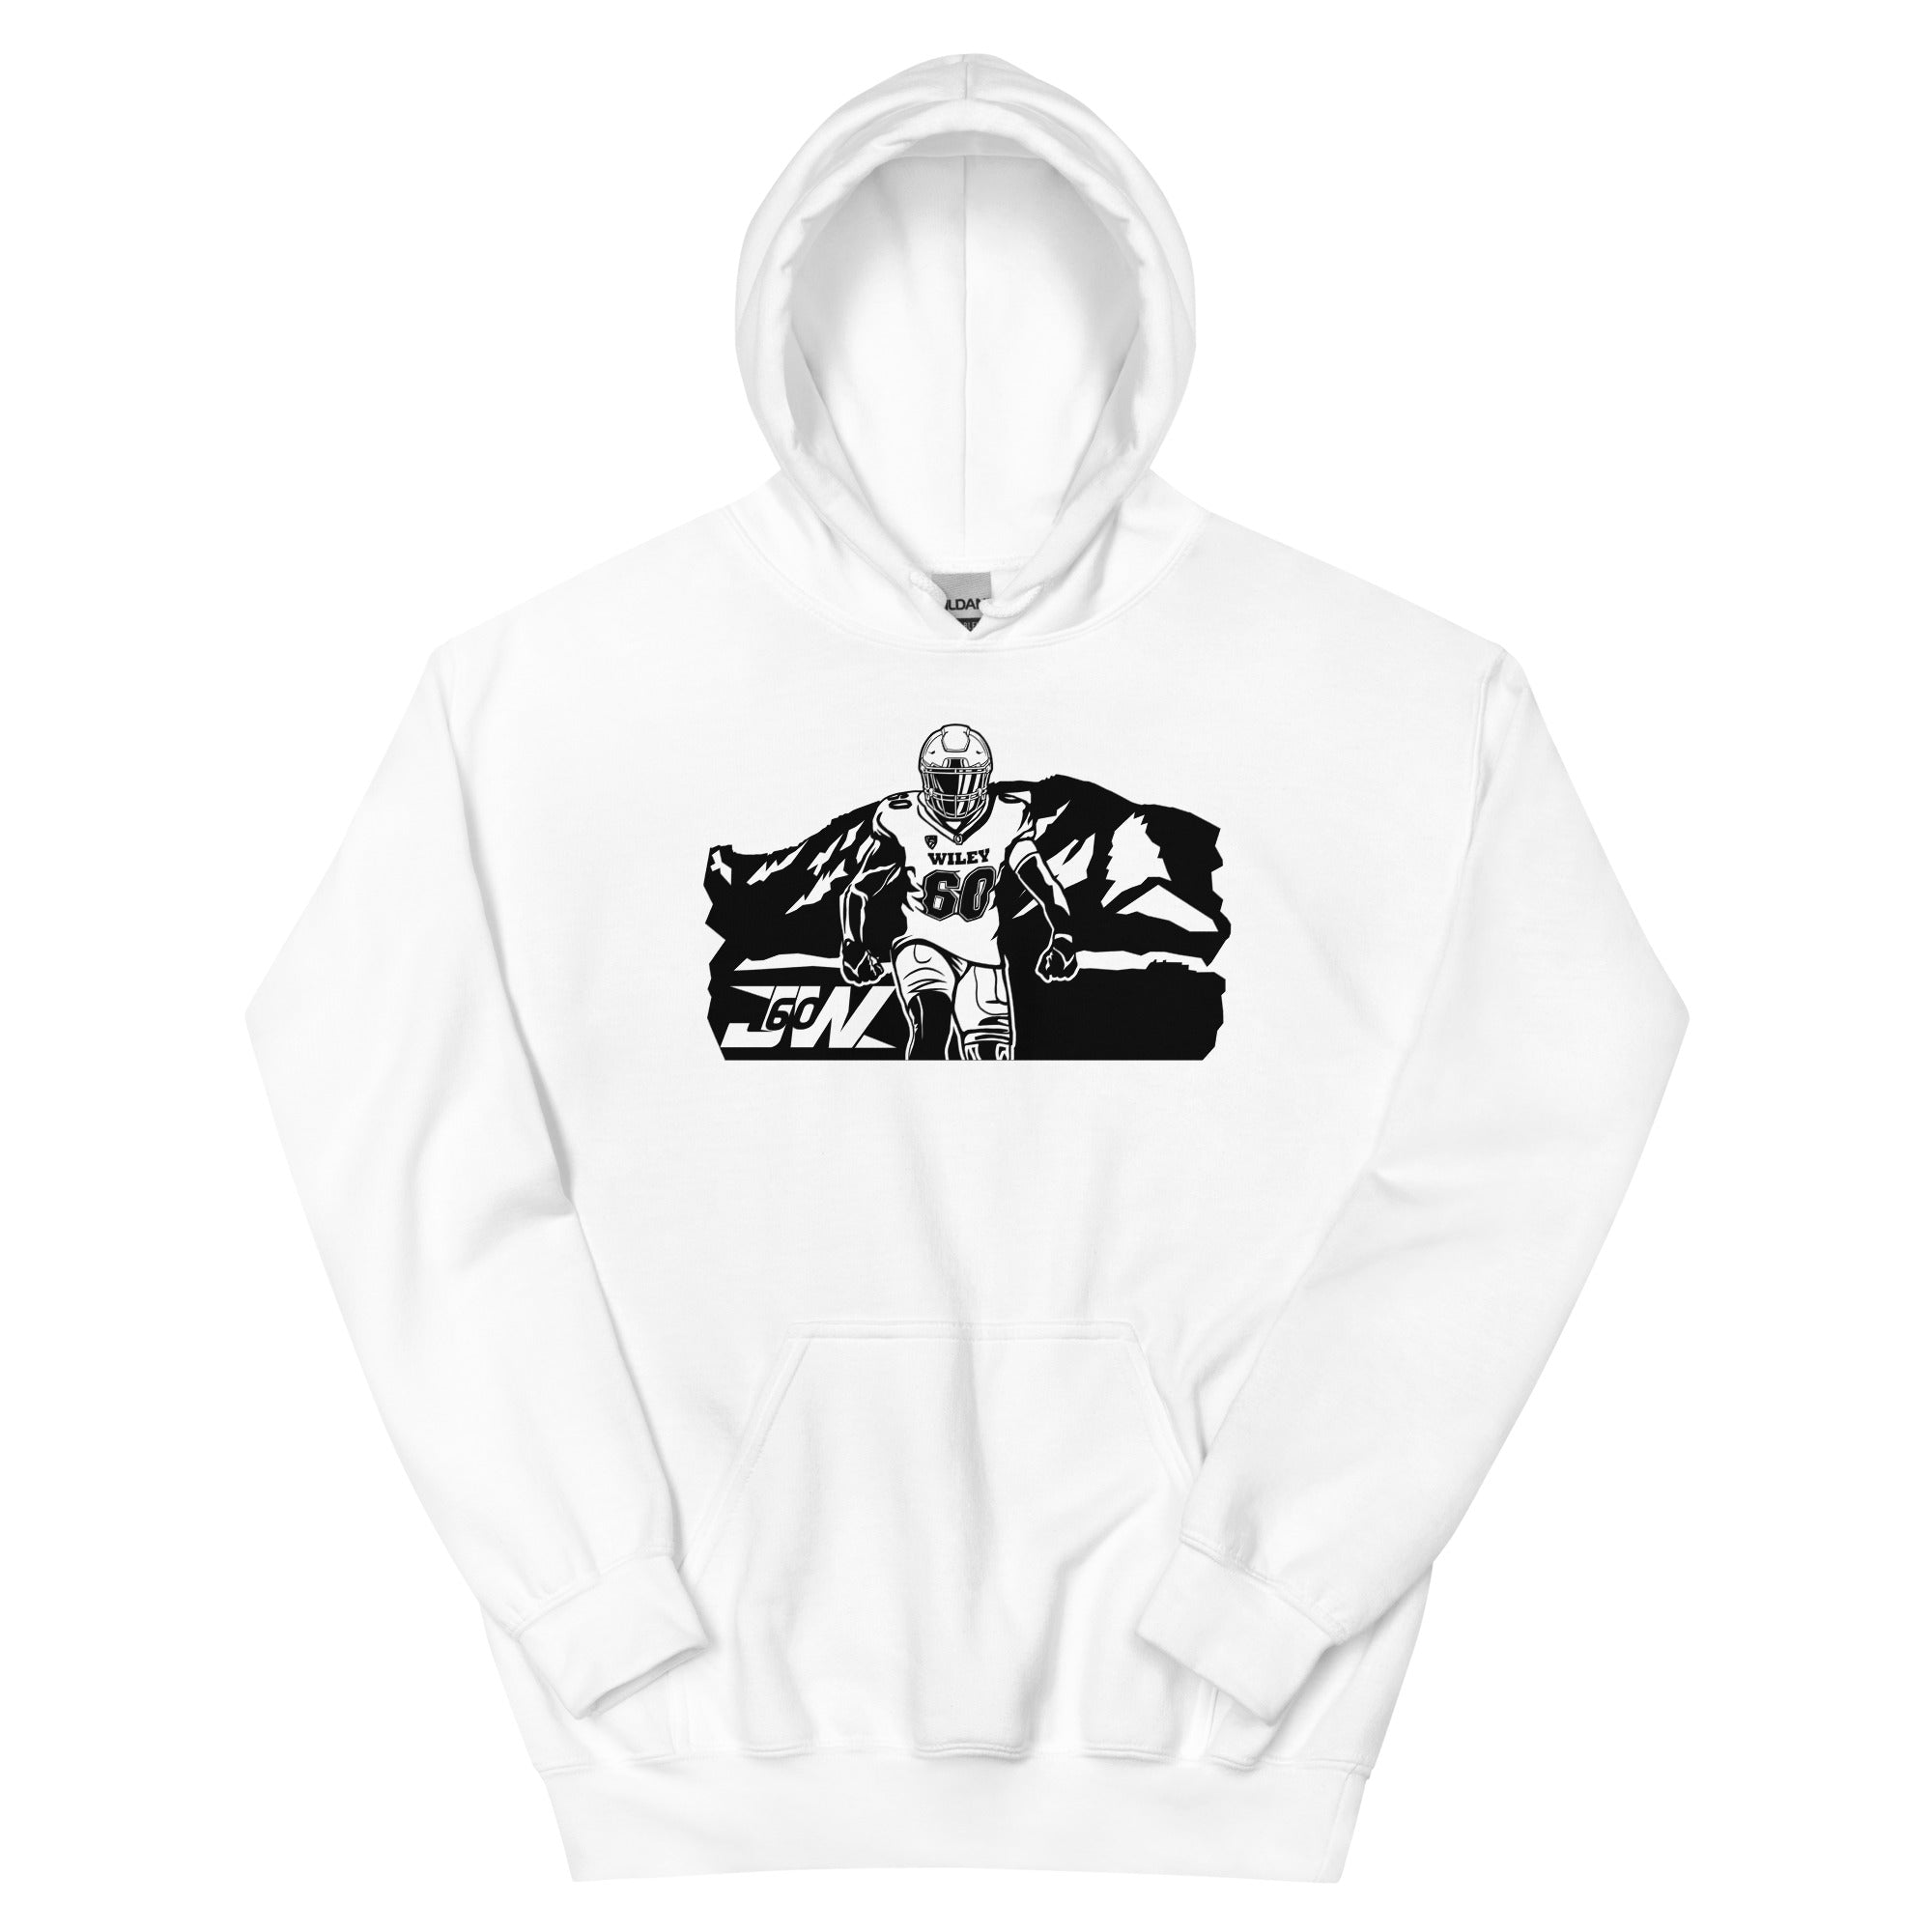 Jake Wiley Graphic Hoodie